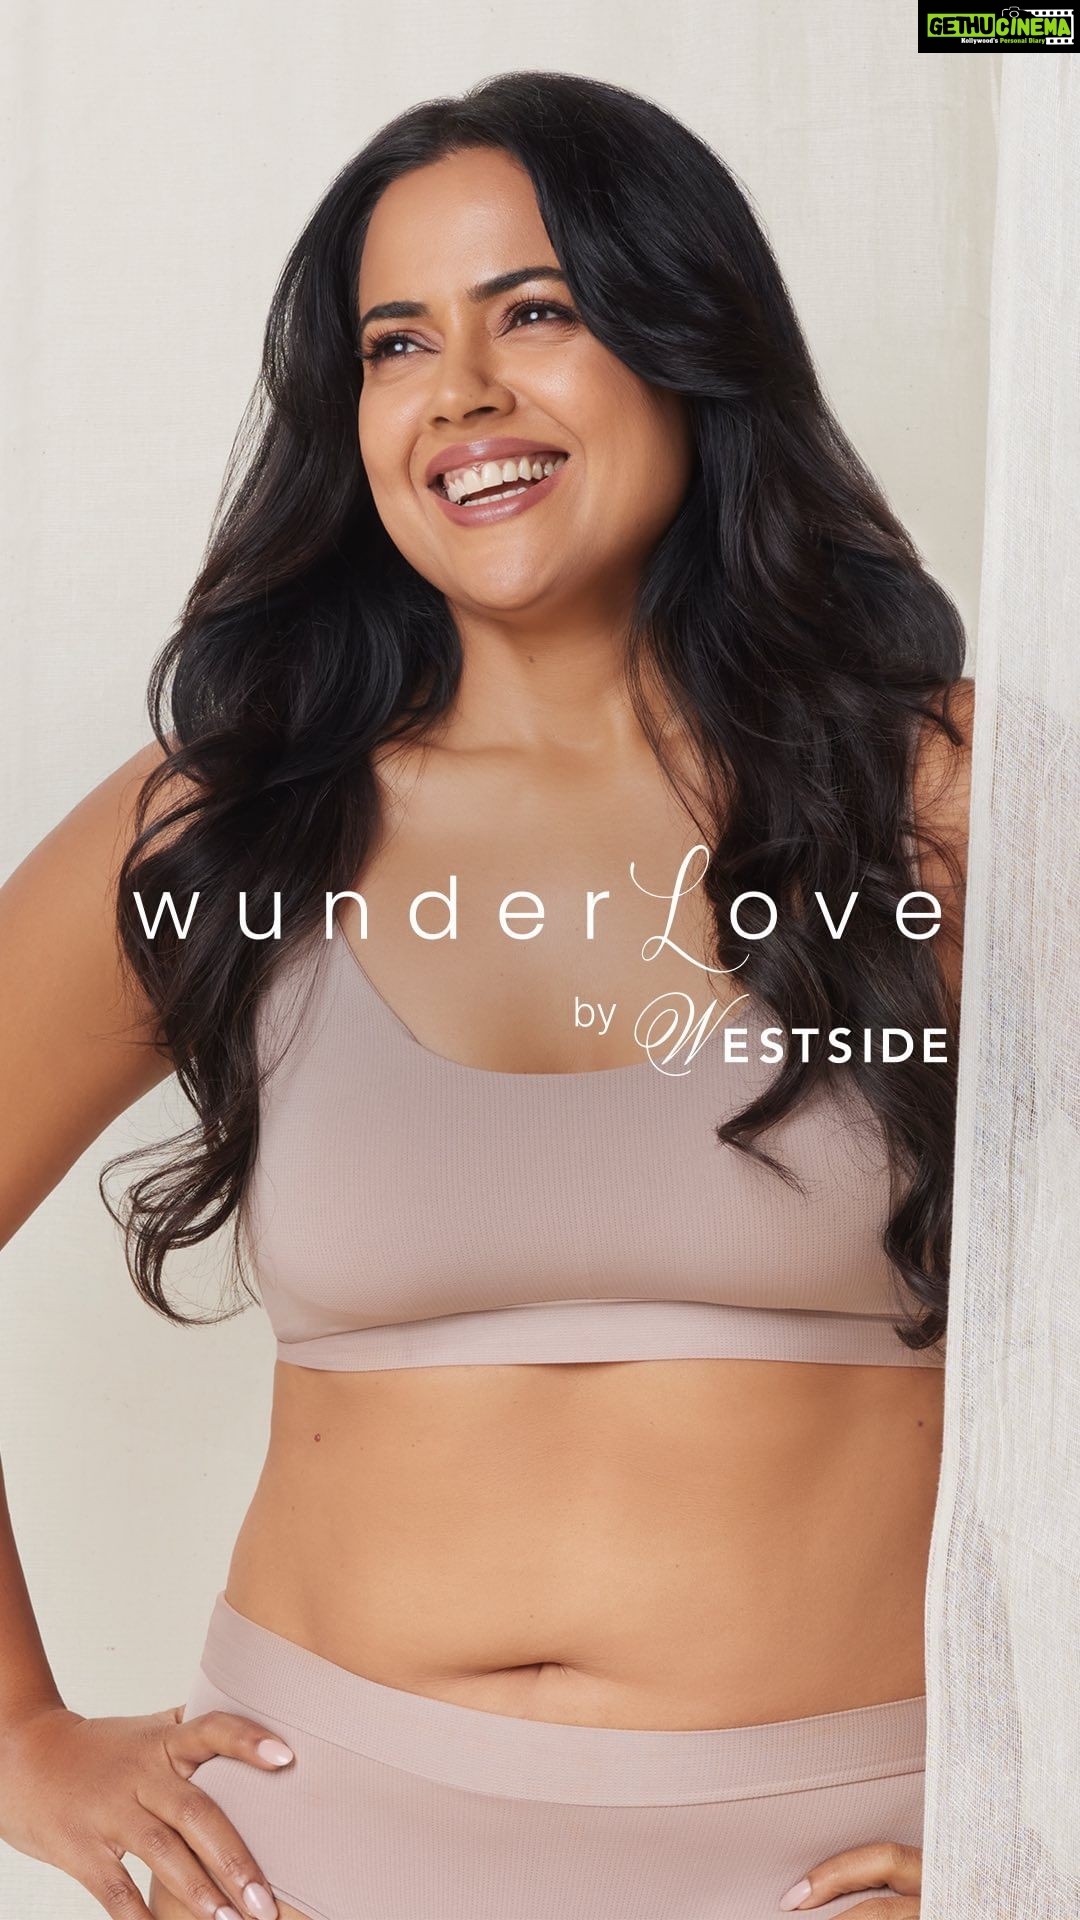 Westside collaborates with Sameera Reddy for 'One Size Fits All' collection